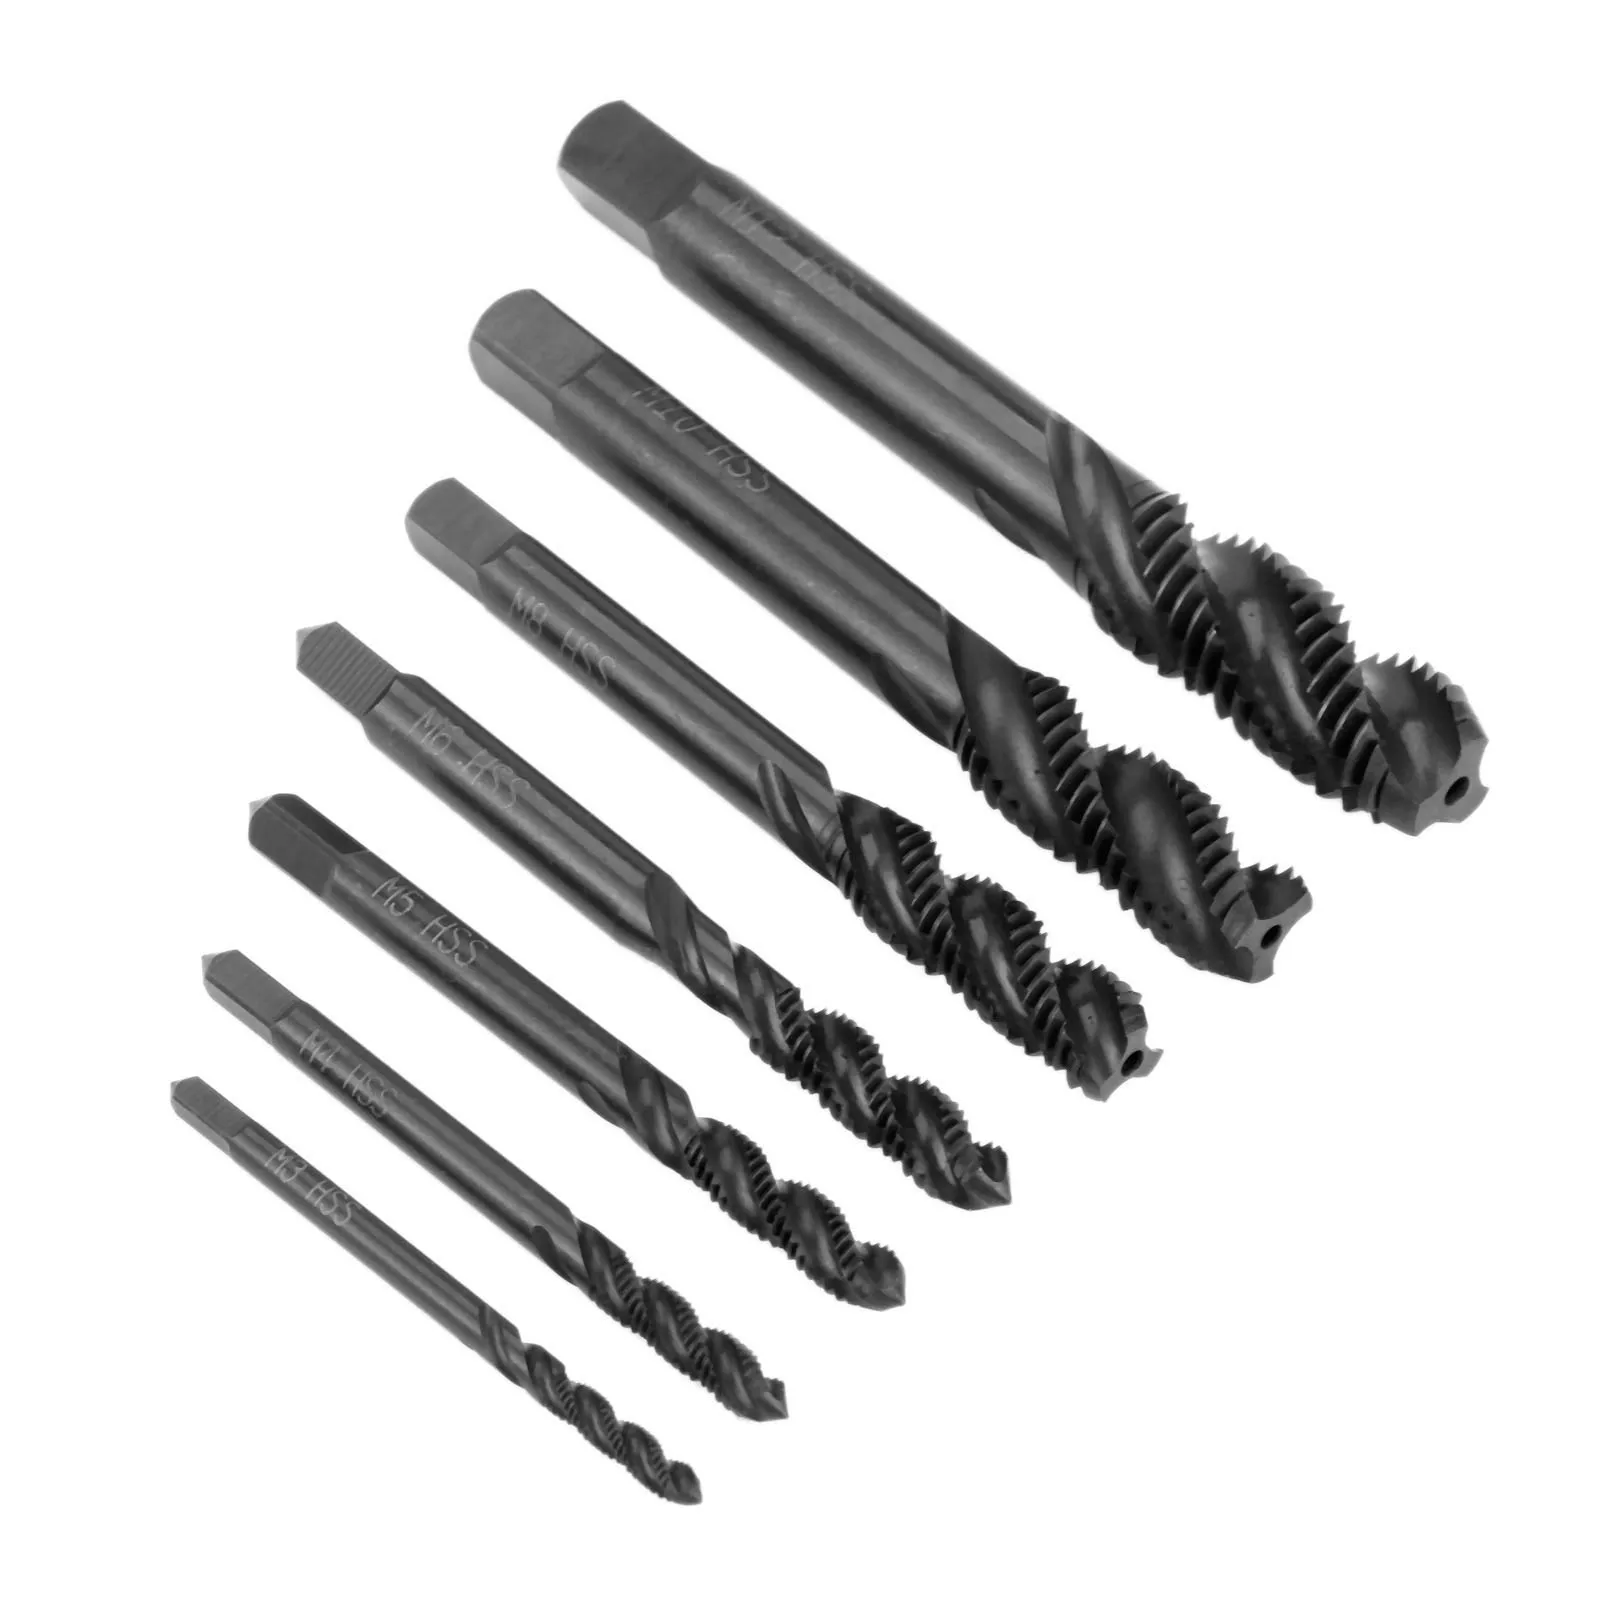 

7pcs/set HSS 6542 Nitriding Metric Spiral Fluted Thread Tap and Die M3/M4/M5/M6/M8//M12 Screw Straight Flute Drill Hand Tools